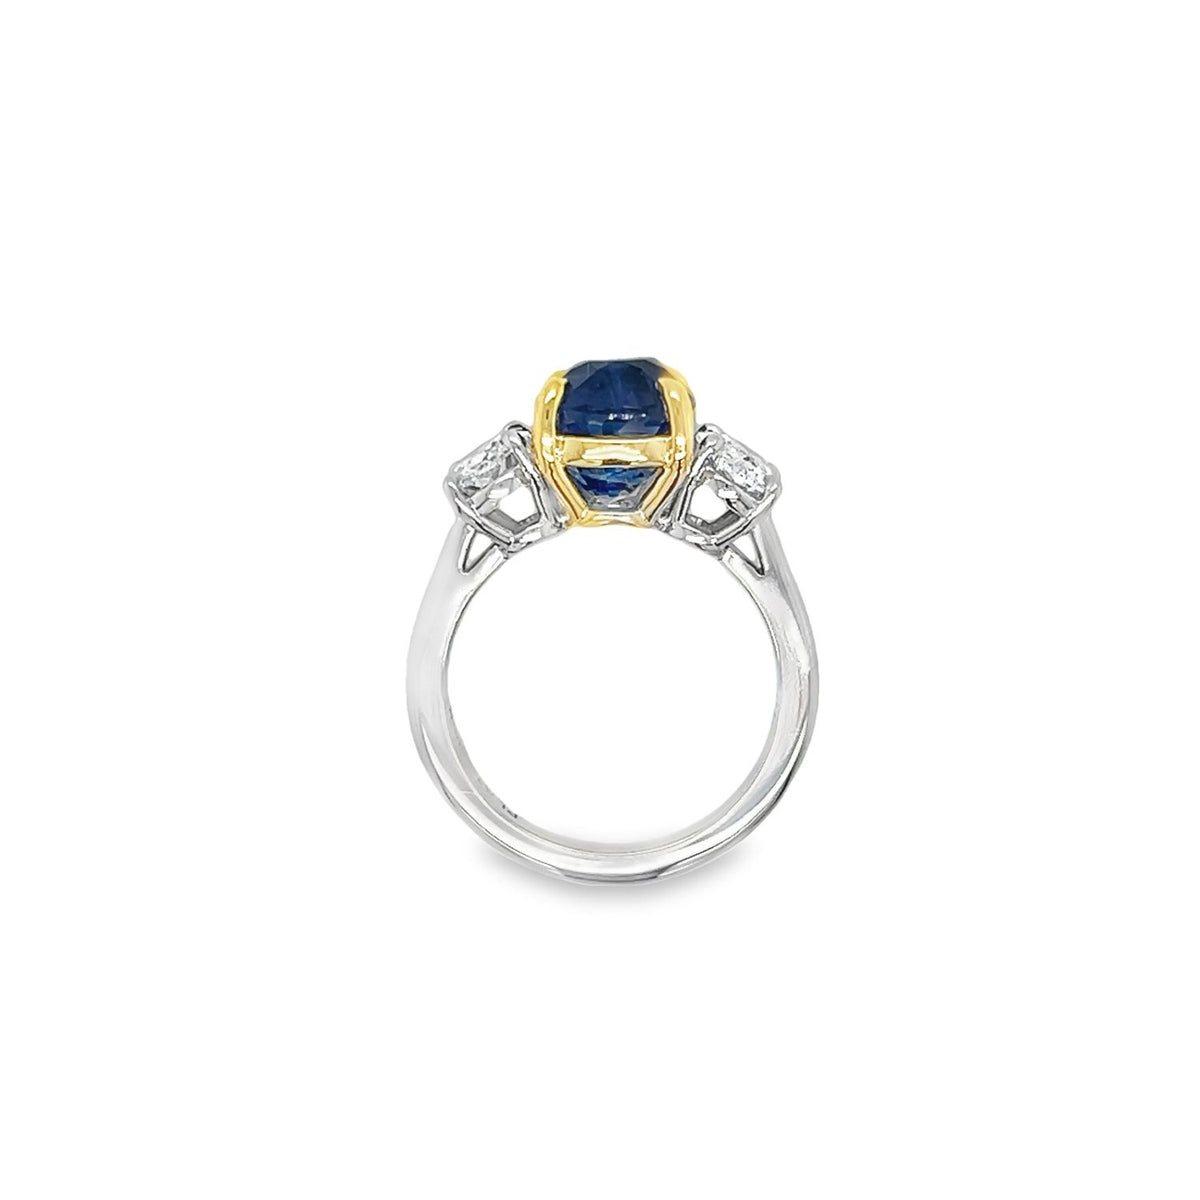 Unique Sapphire and Diamond Ring with GIA Certificate